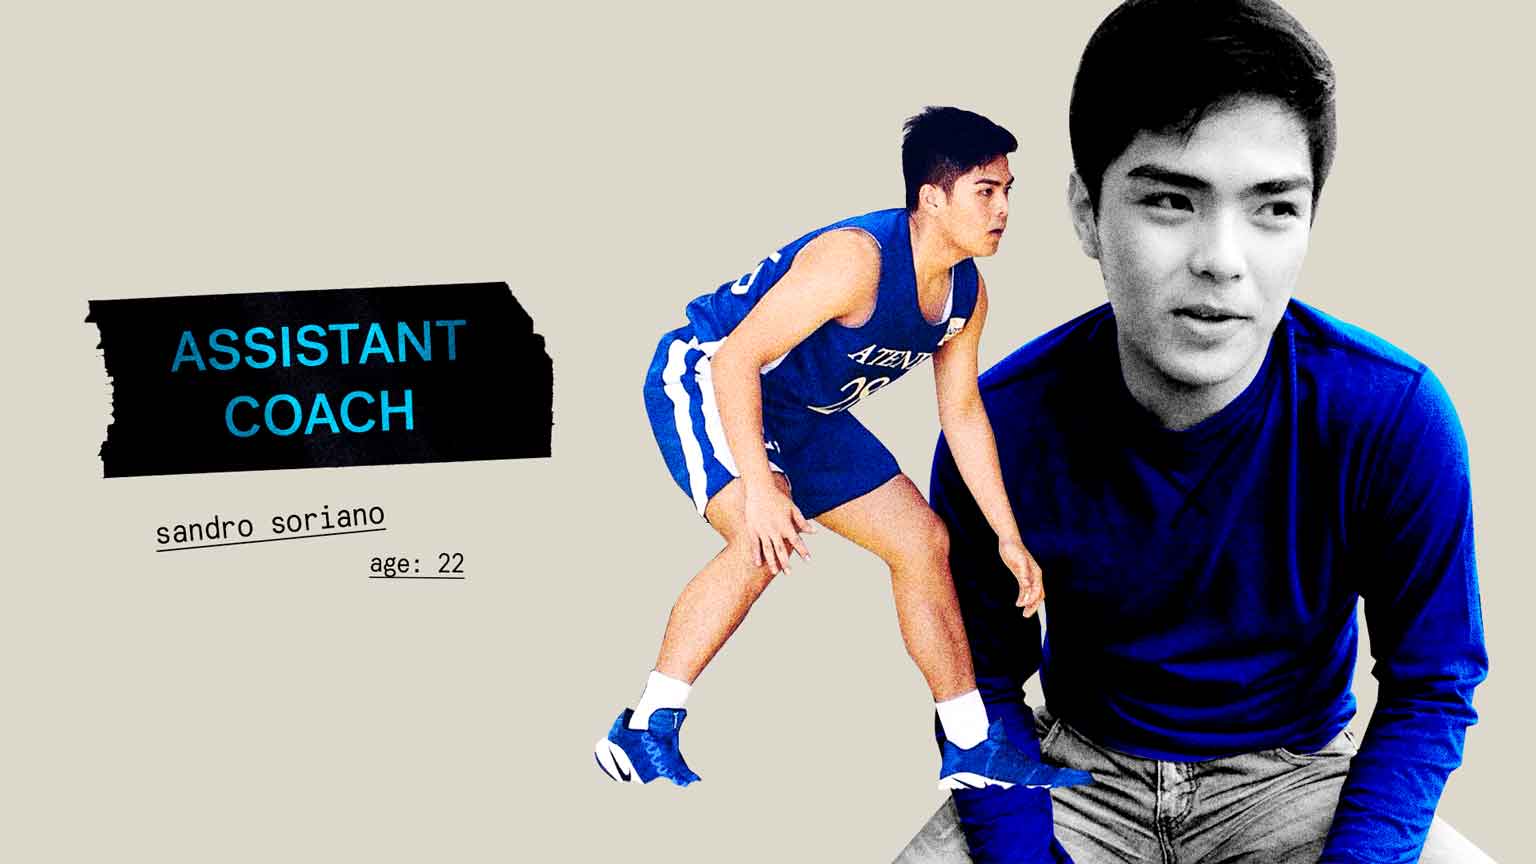 MEET THE 22-YEAR-OLD ASSISTANT COACH OF GILAS PILIPINAS